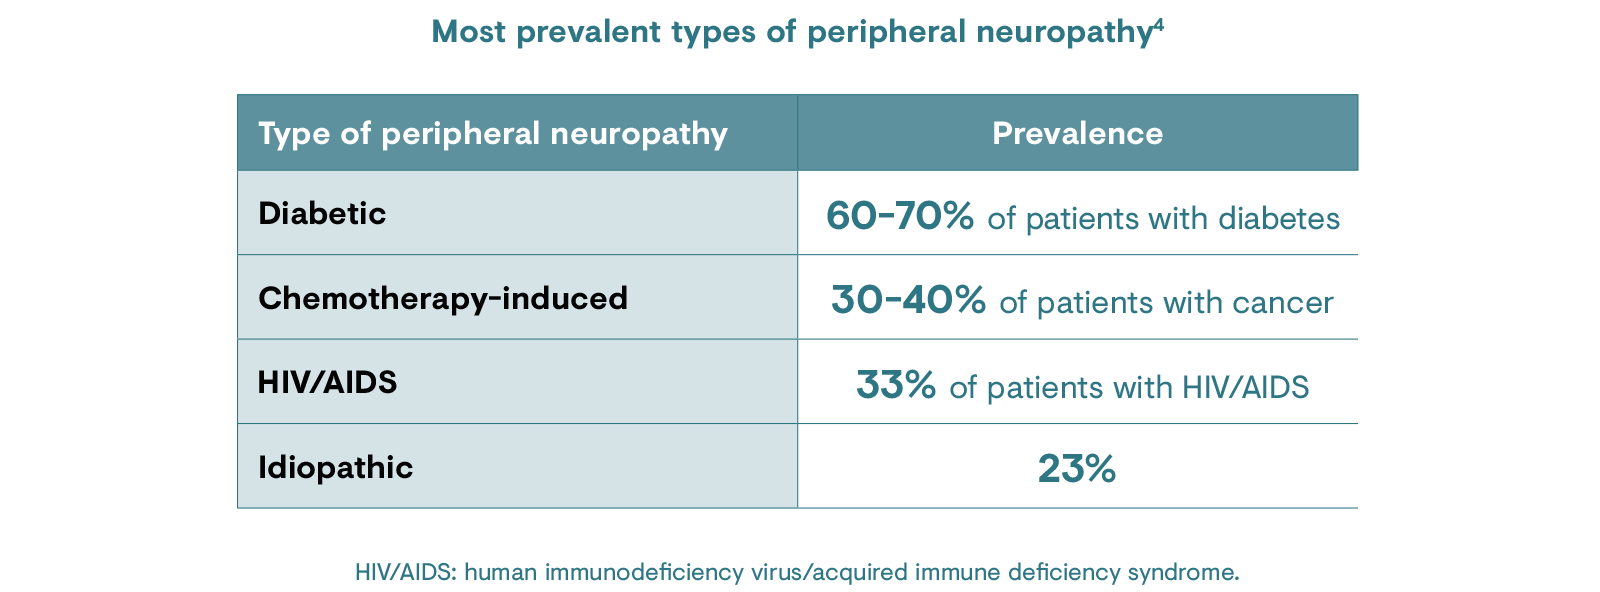 Most prevalent types of peripheral neuropathy